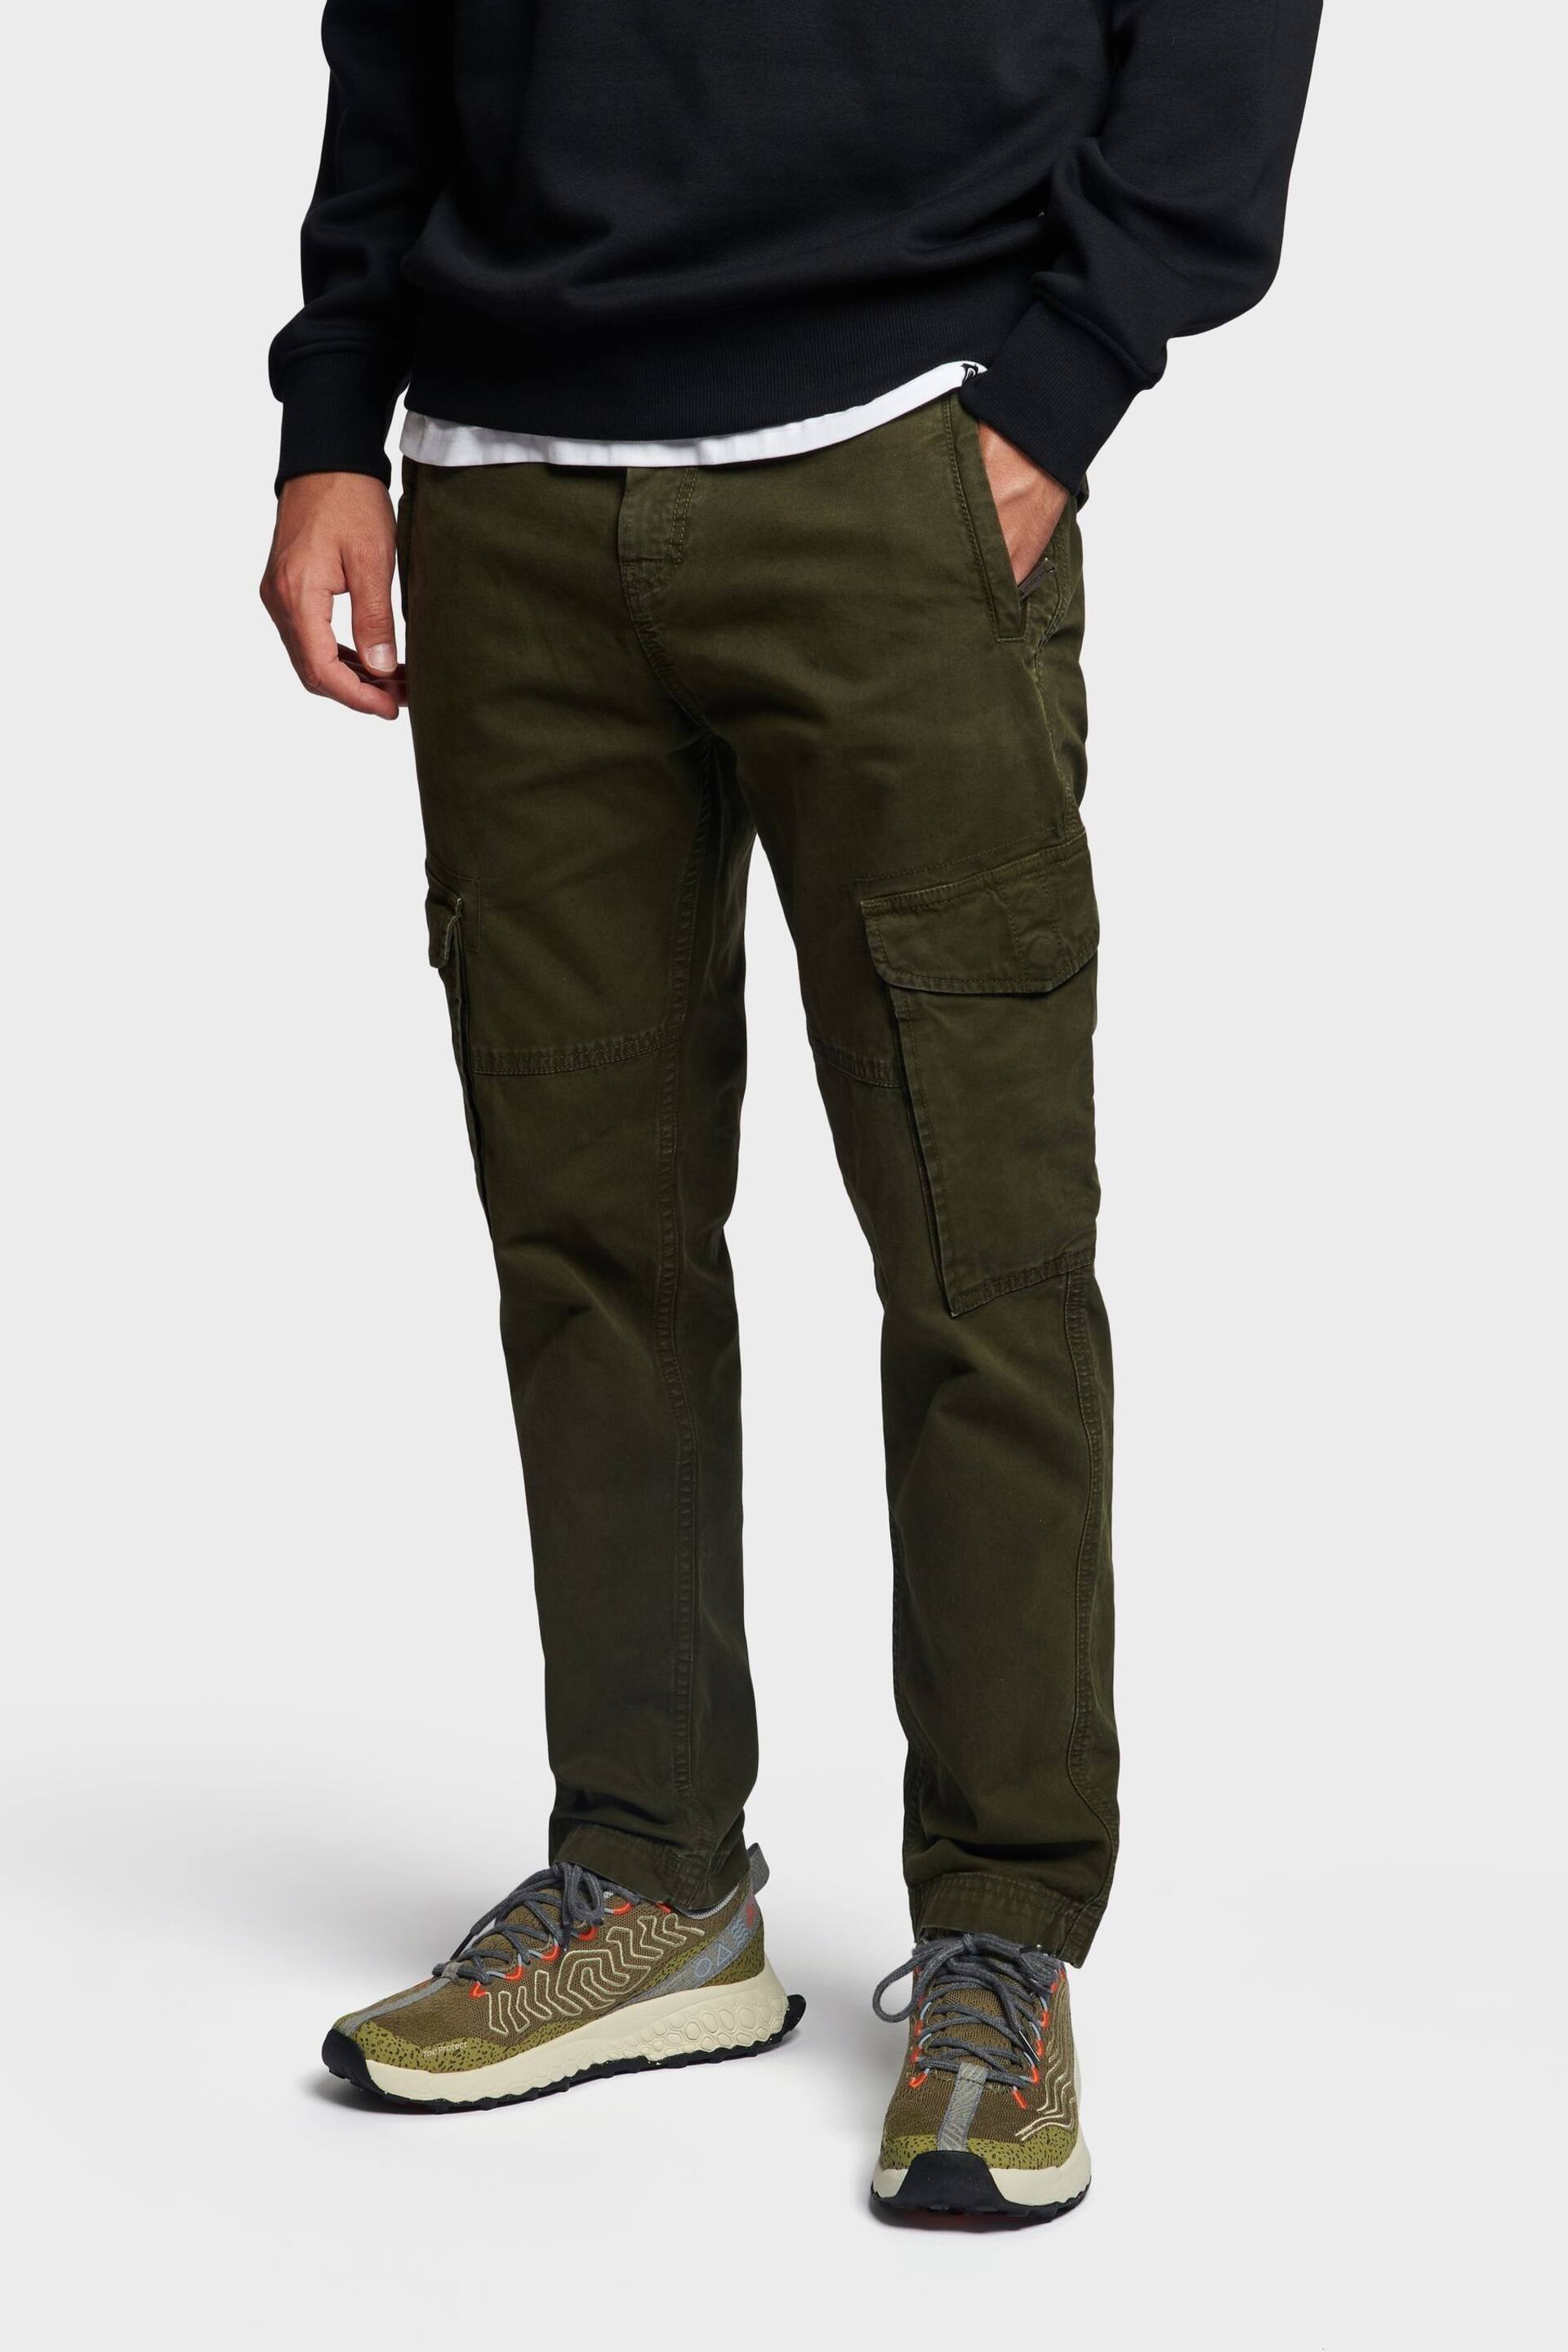 Penfield Green Bear Cargo Trousers - Image 1 of 7